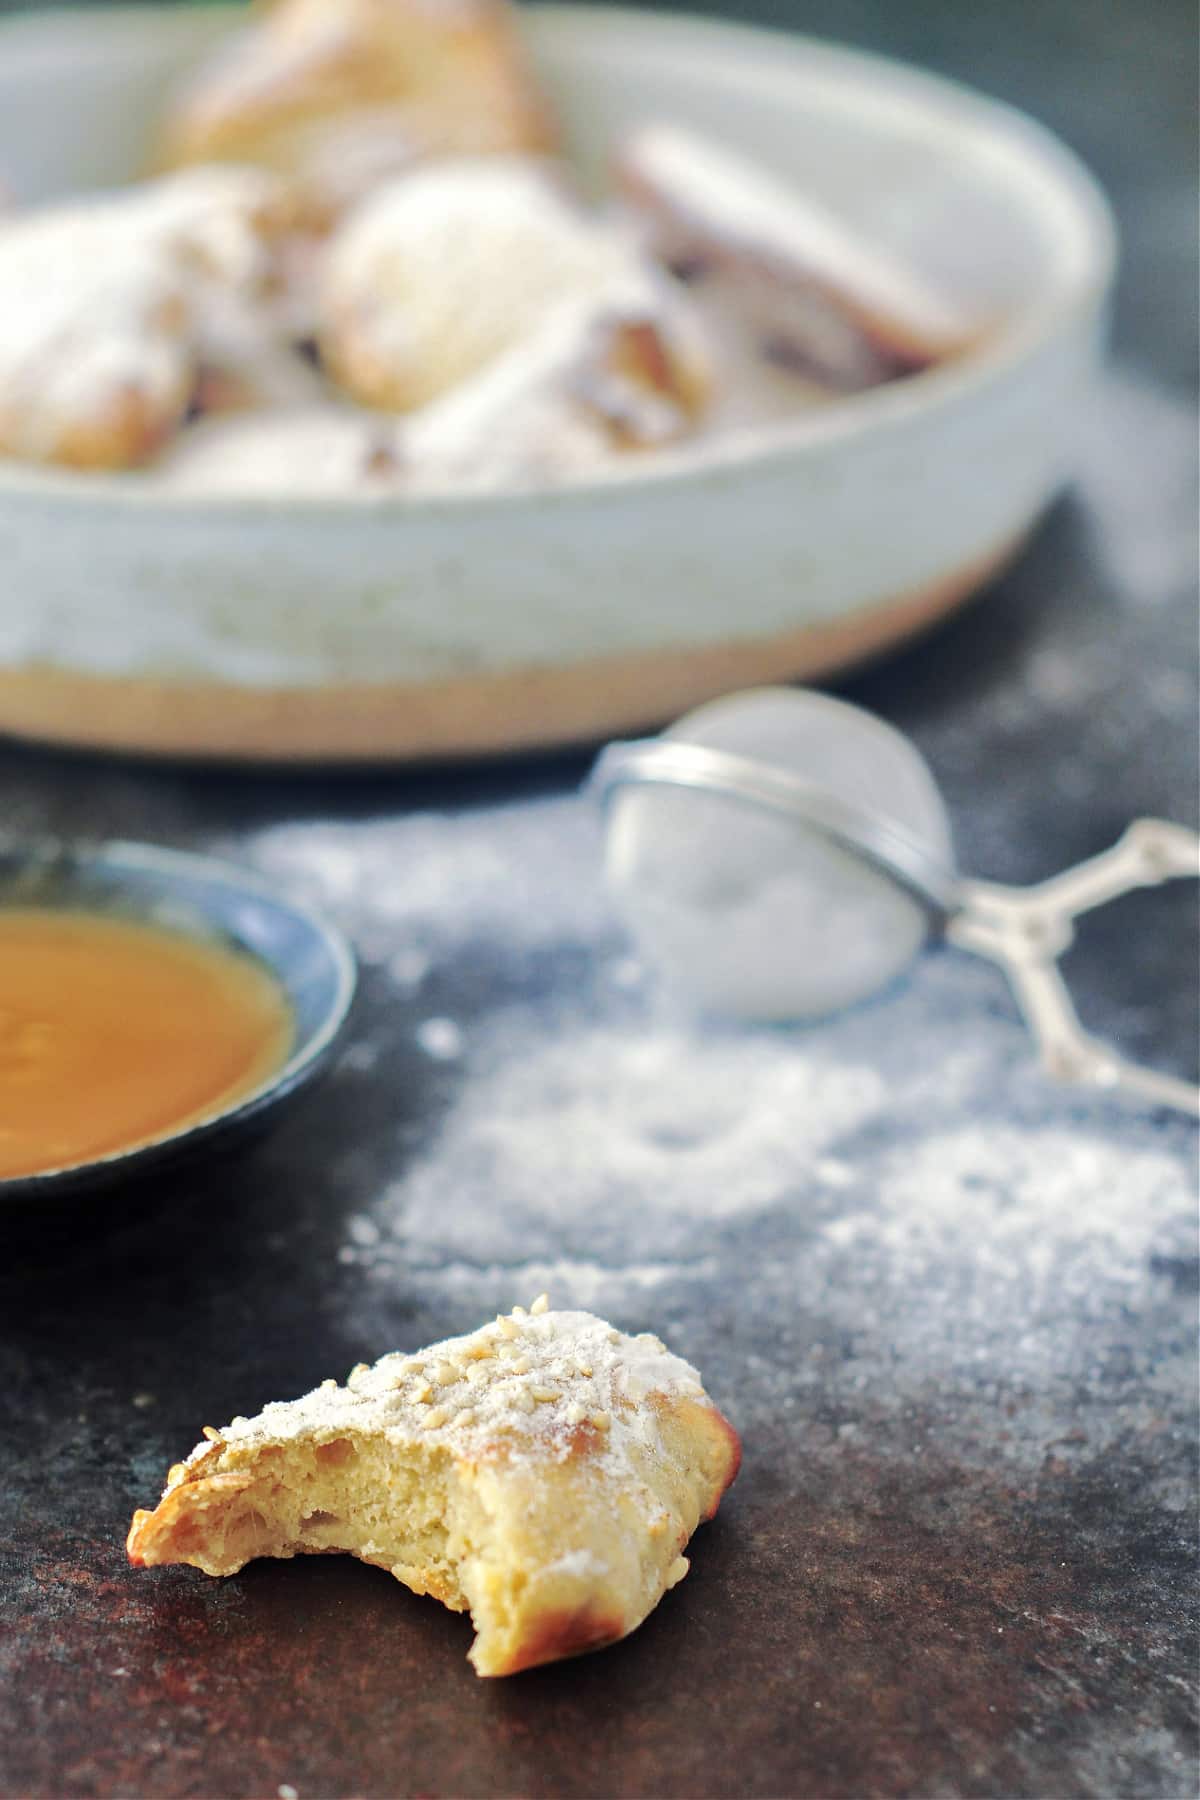 A banana fritter with a bite out of it sits next to a bowl of fritters and a bowl of caramel sauce. Powdered sugar dusts the surface around the bowl, and a mesh strainer sits in the powdered sugar dust.